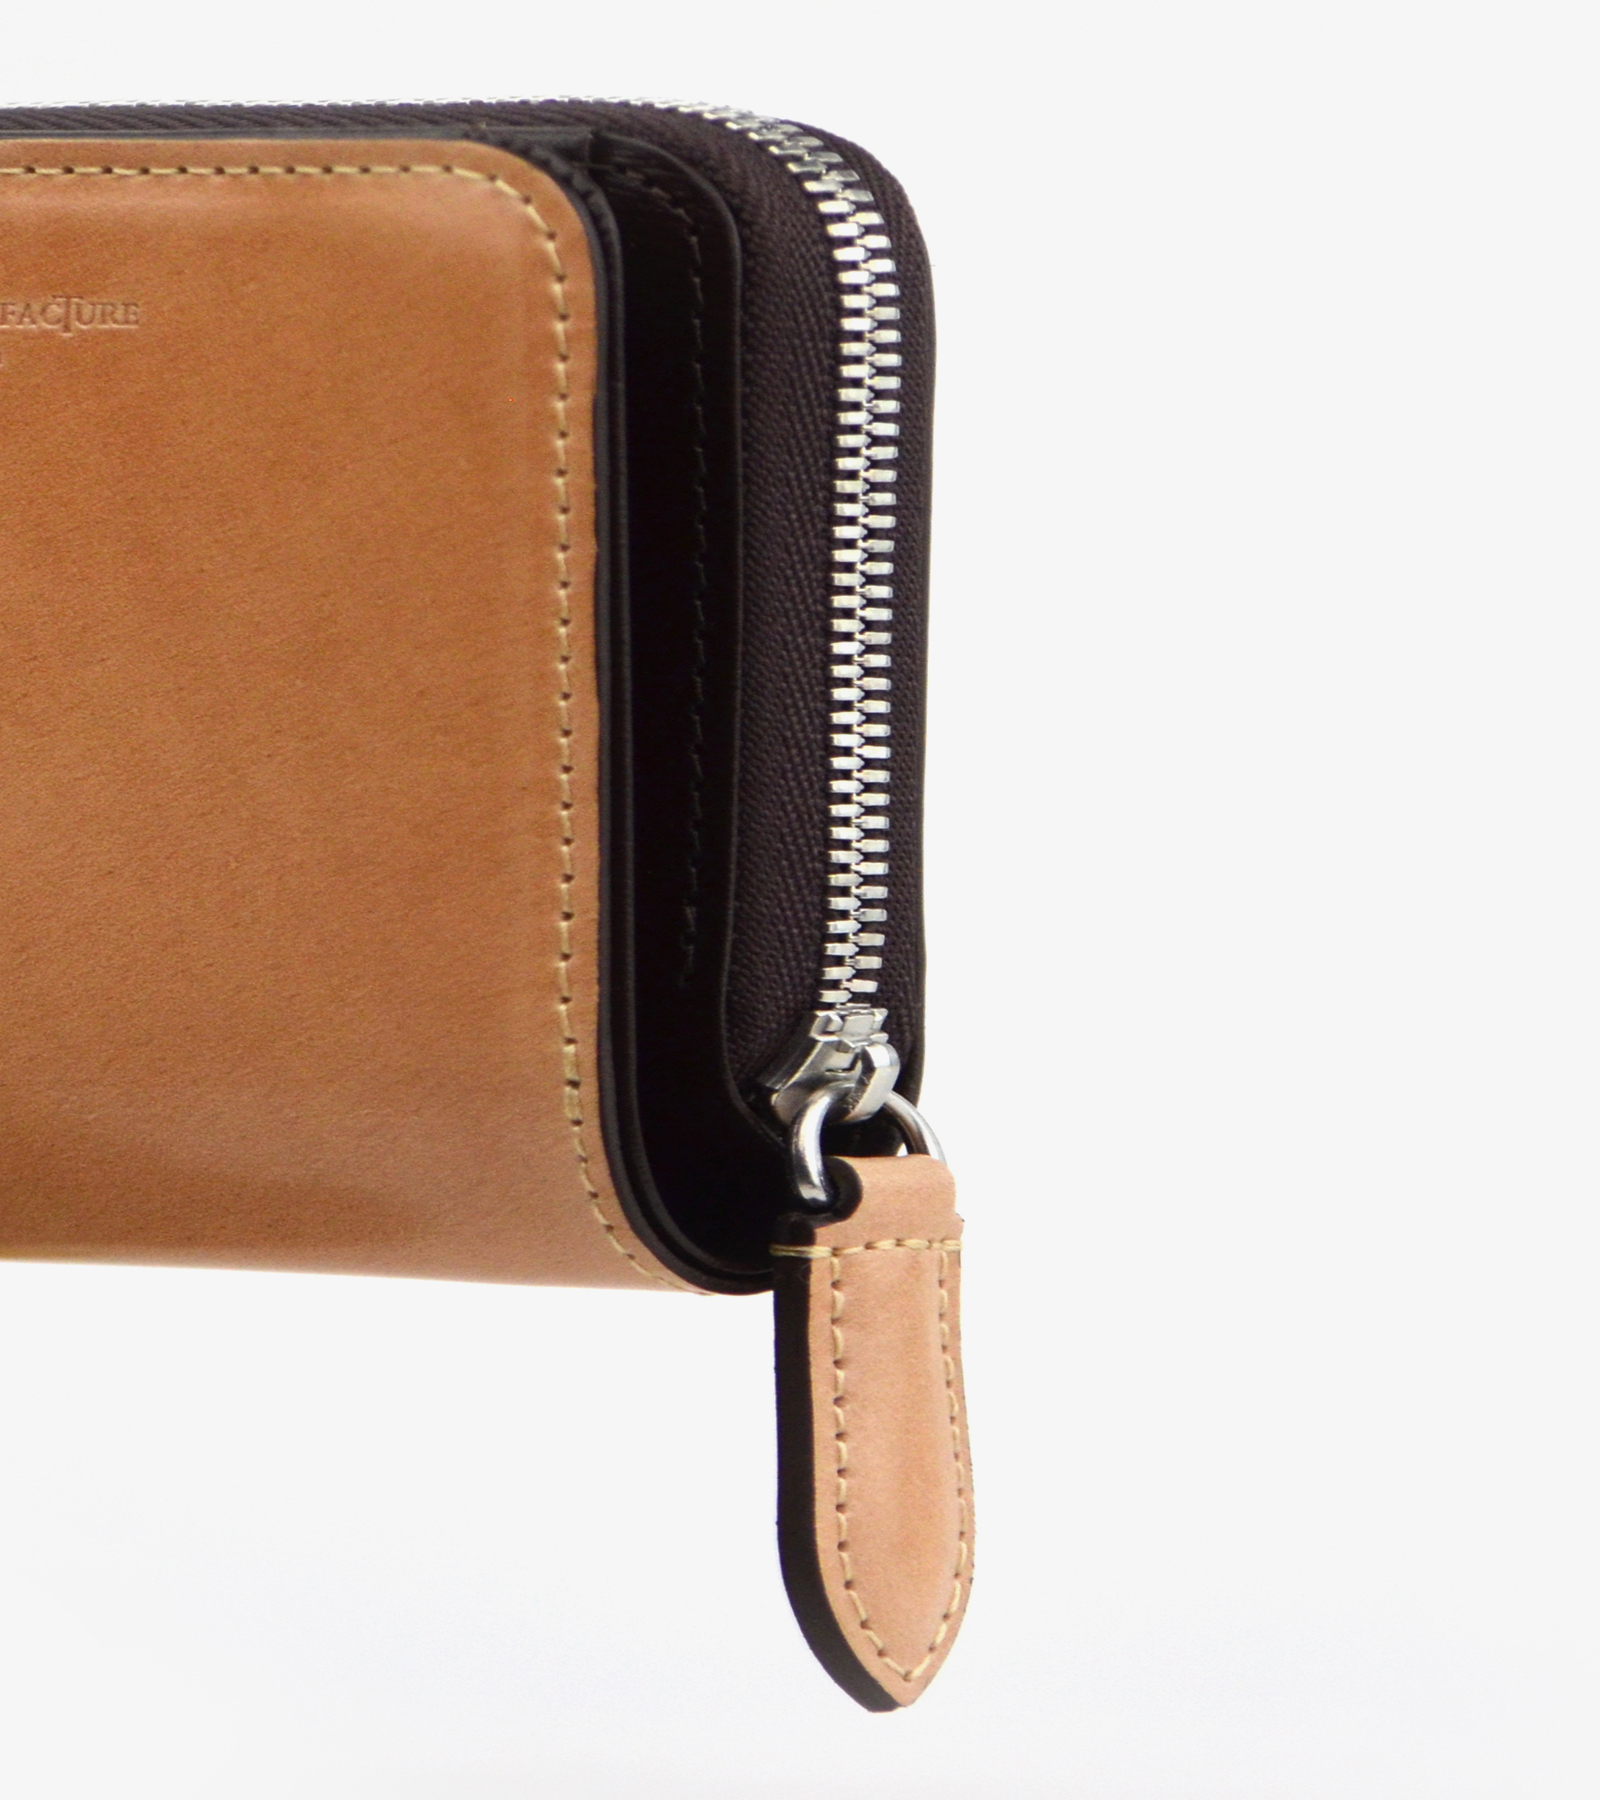 CORDVAN ZIPPED COMPACT WALLET / The Warmthcrafts Manufacture Web Store